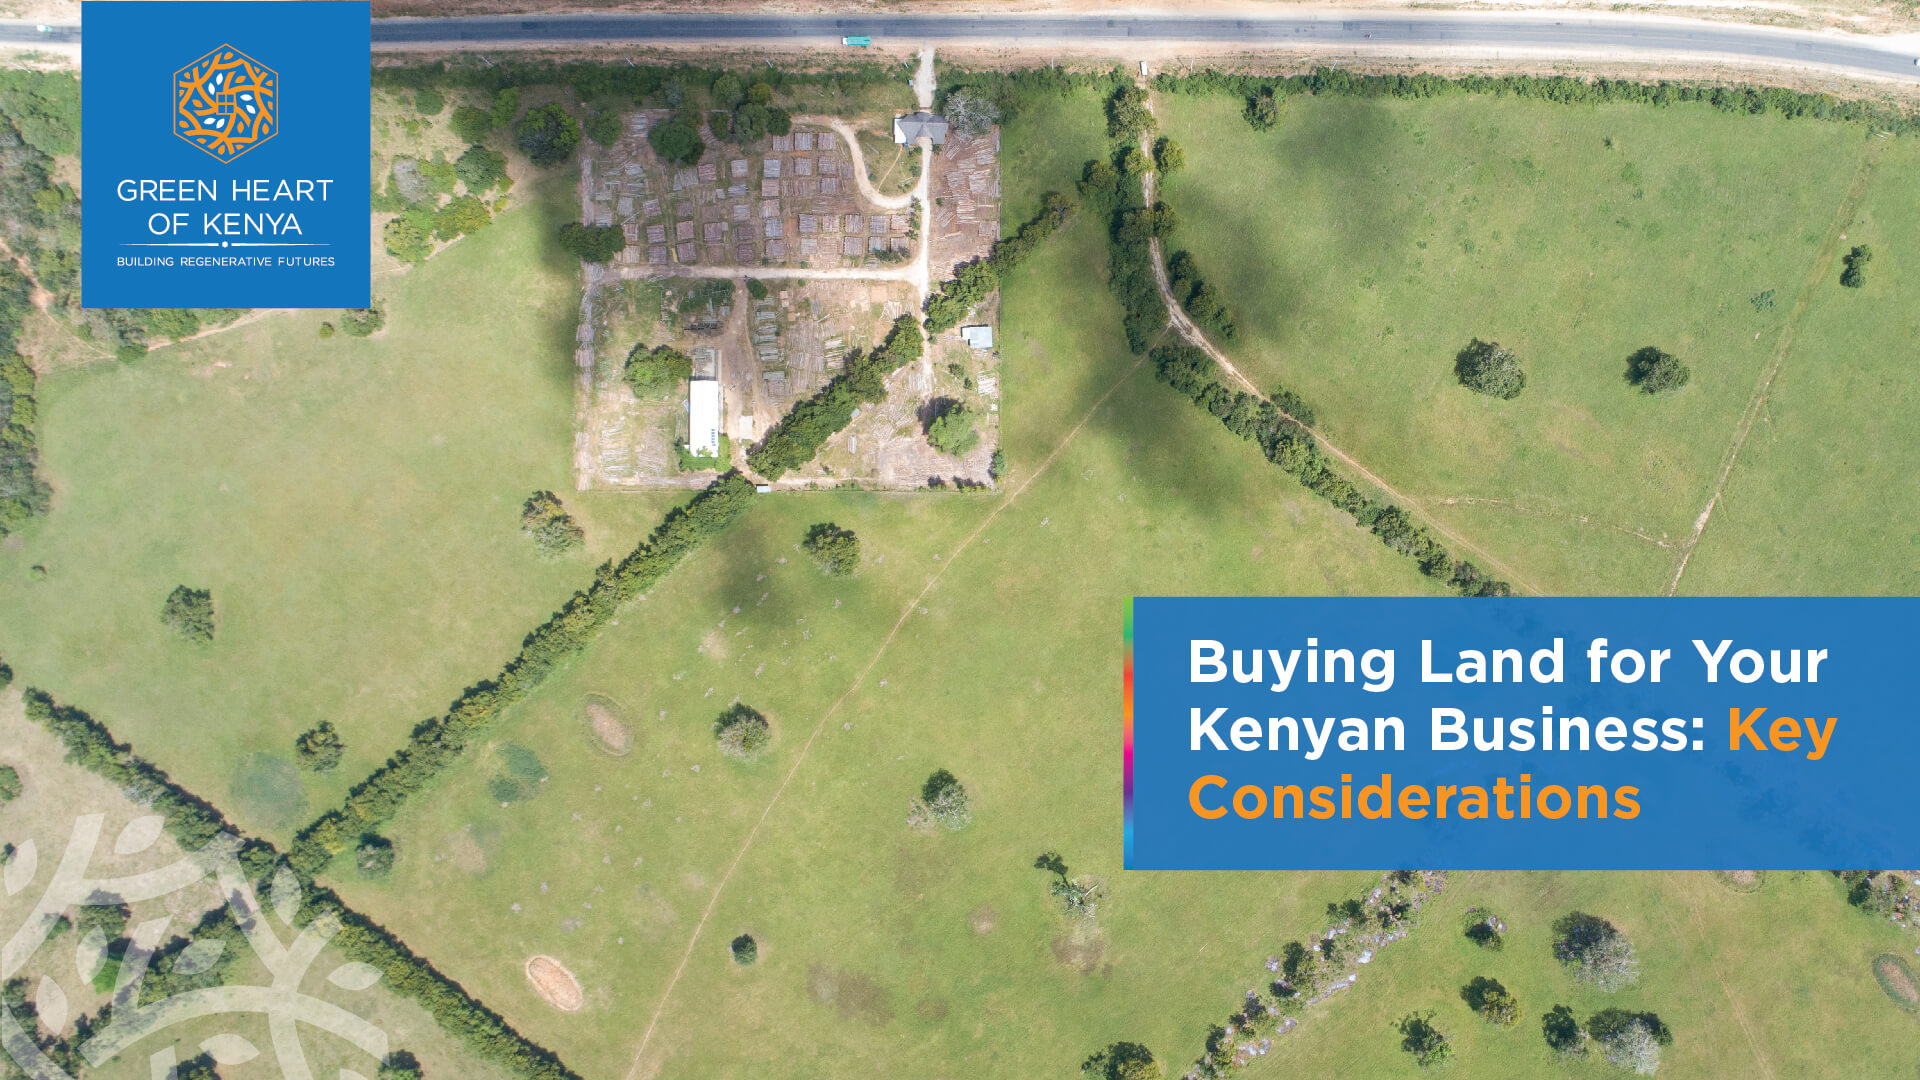 Factors To Consider When Buying Land for Business Purposes in Kenya